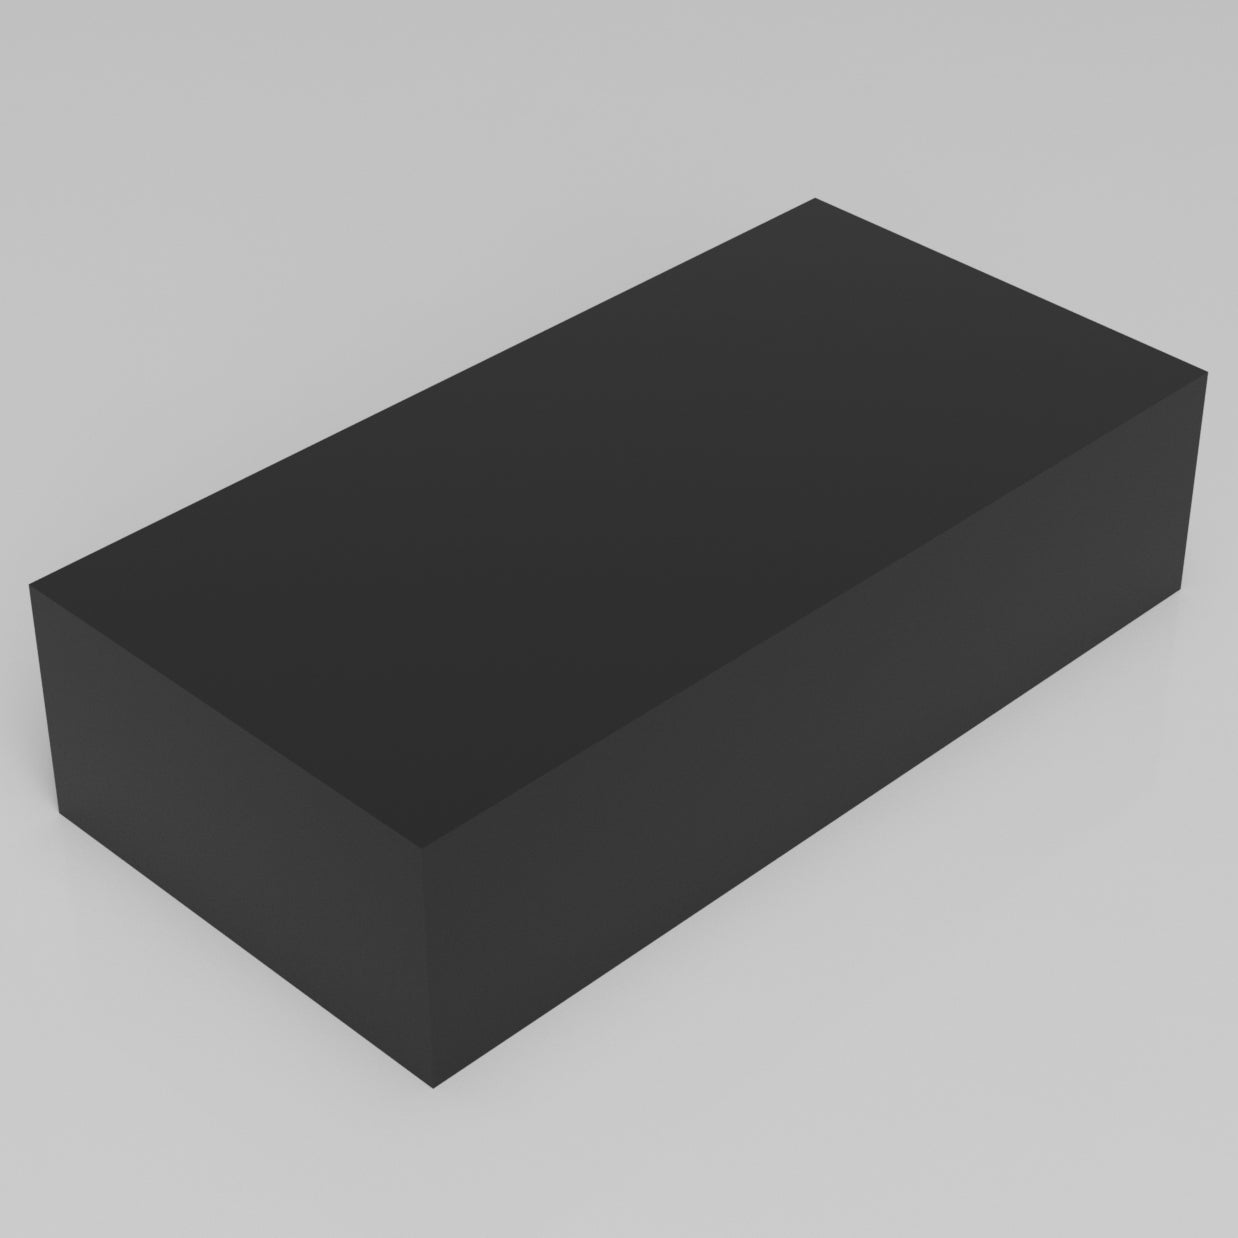 Machinable Wax Rectangular Block Front View 3 Inch by 6 Inch by 12 Inch